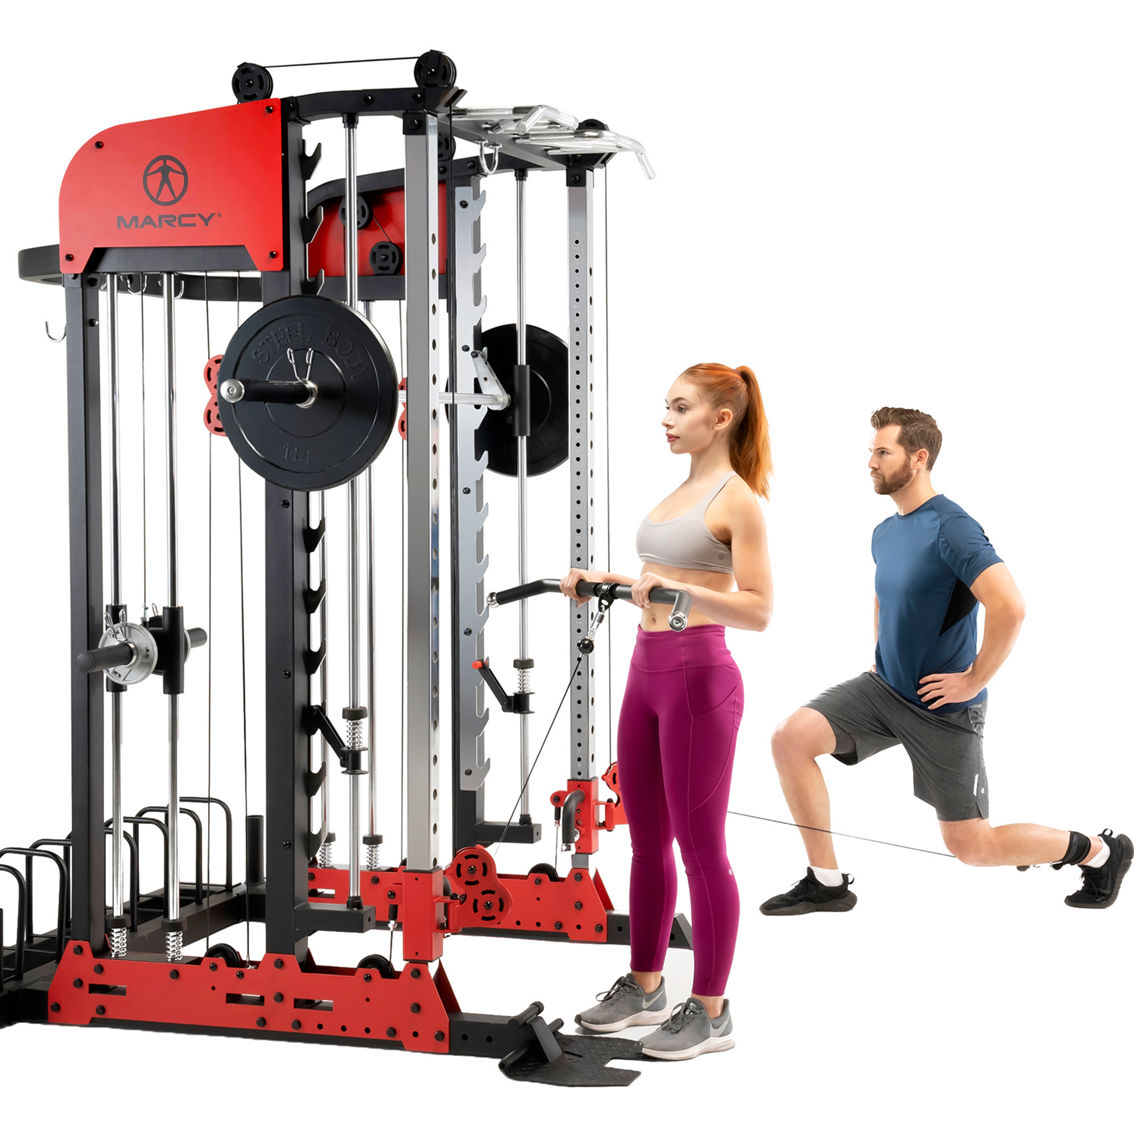 Marcy Pro Deluxe Smith Cage Home Gym System - Image 5 of 5